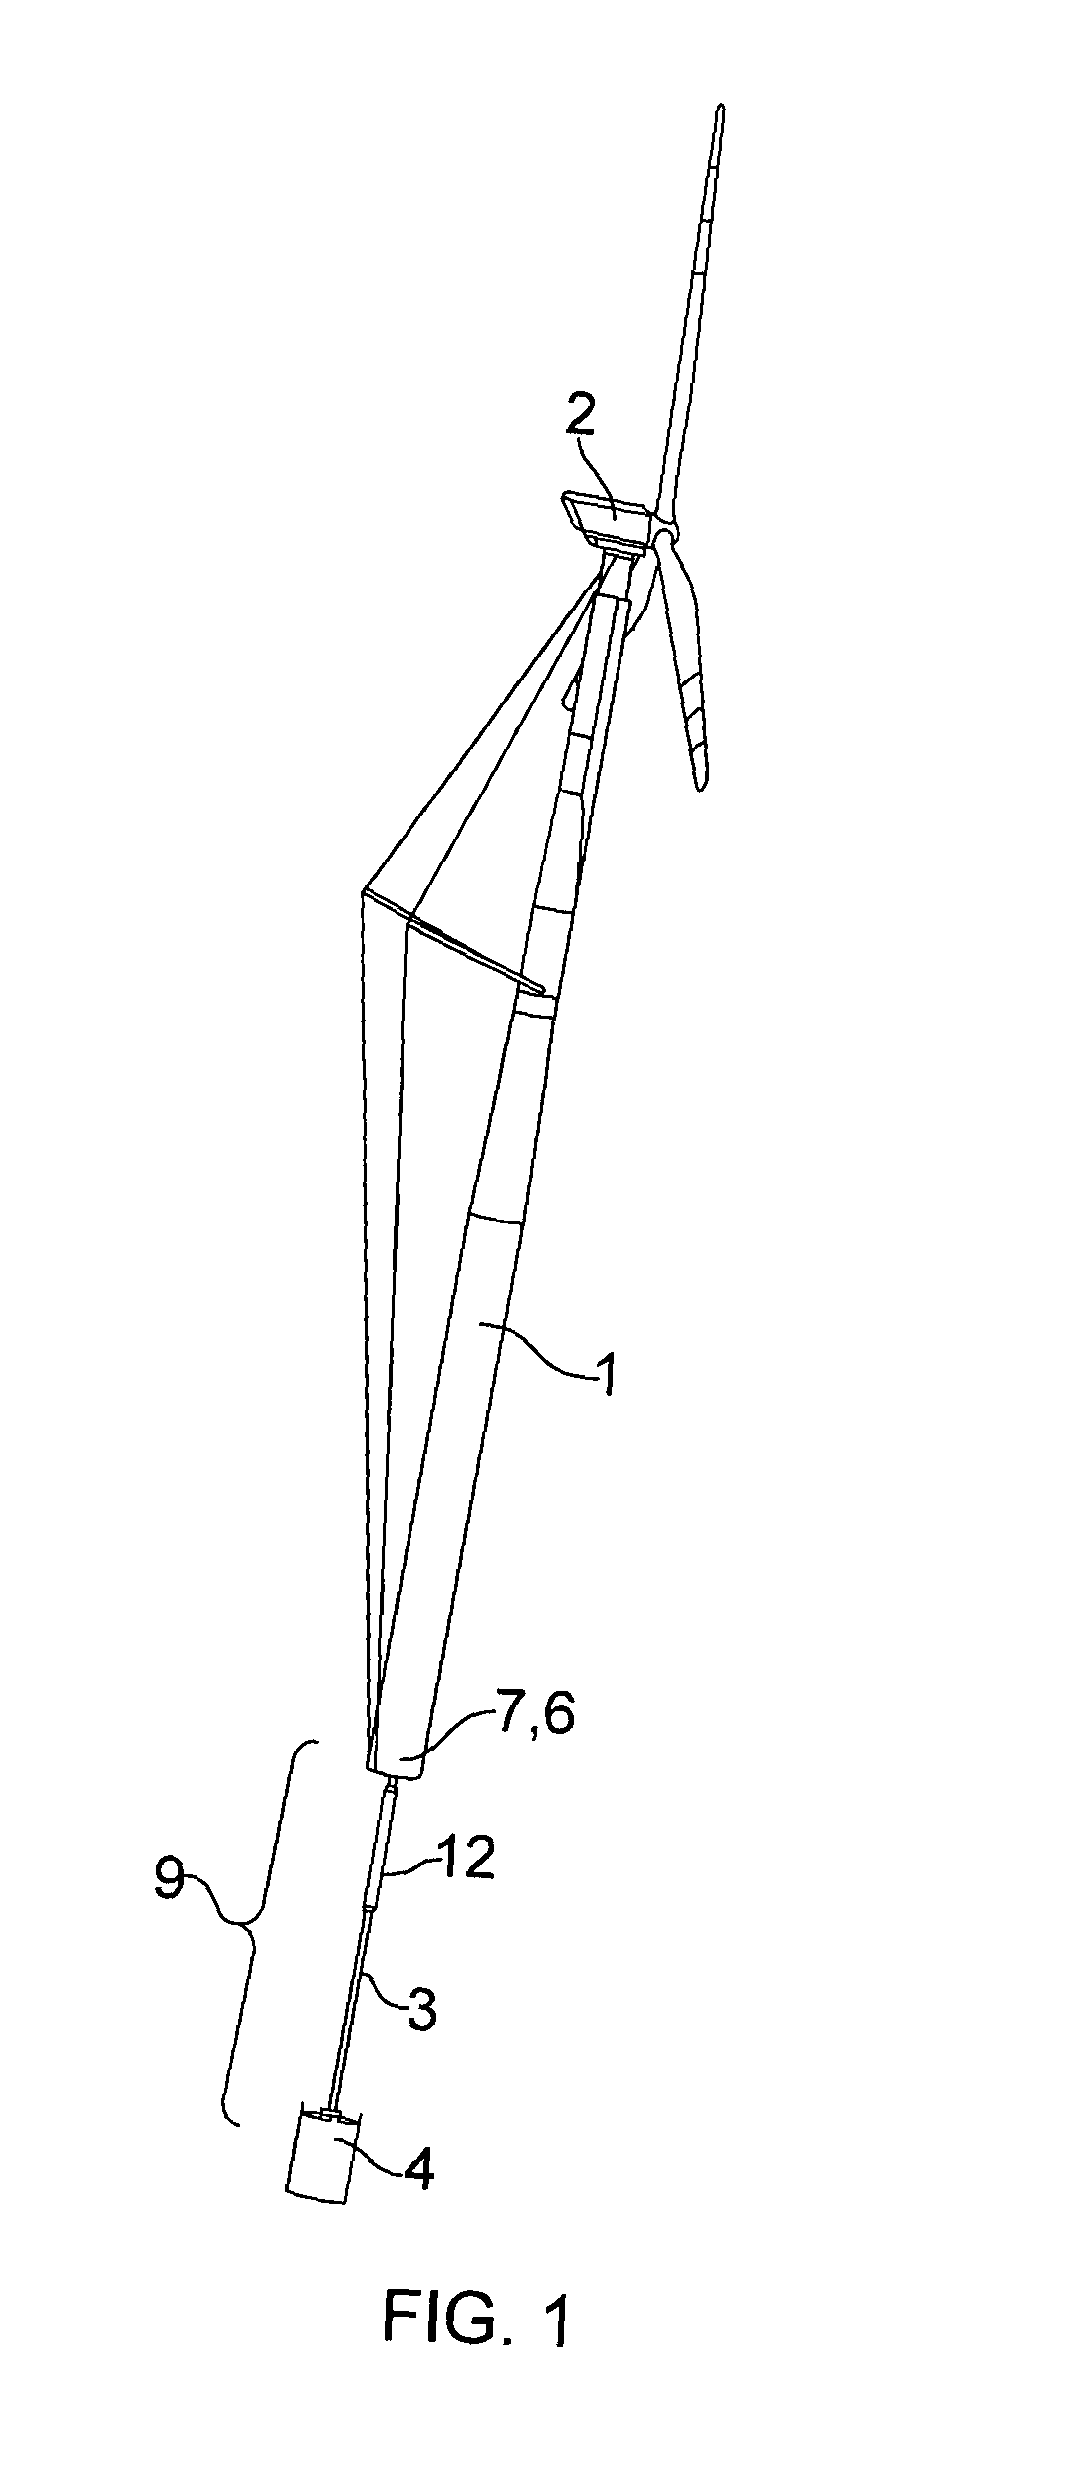 Offshore wind turbine generator connection arrangement and tower system